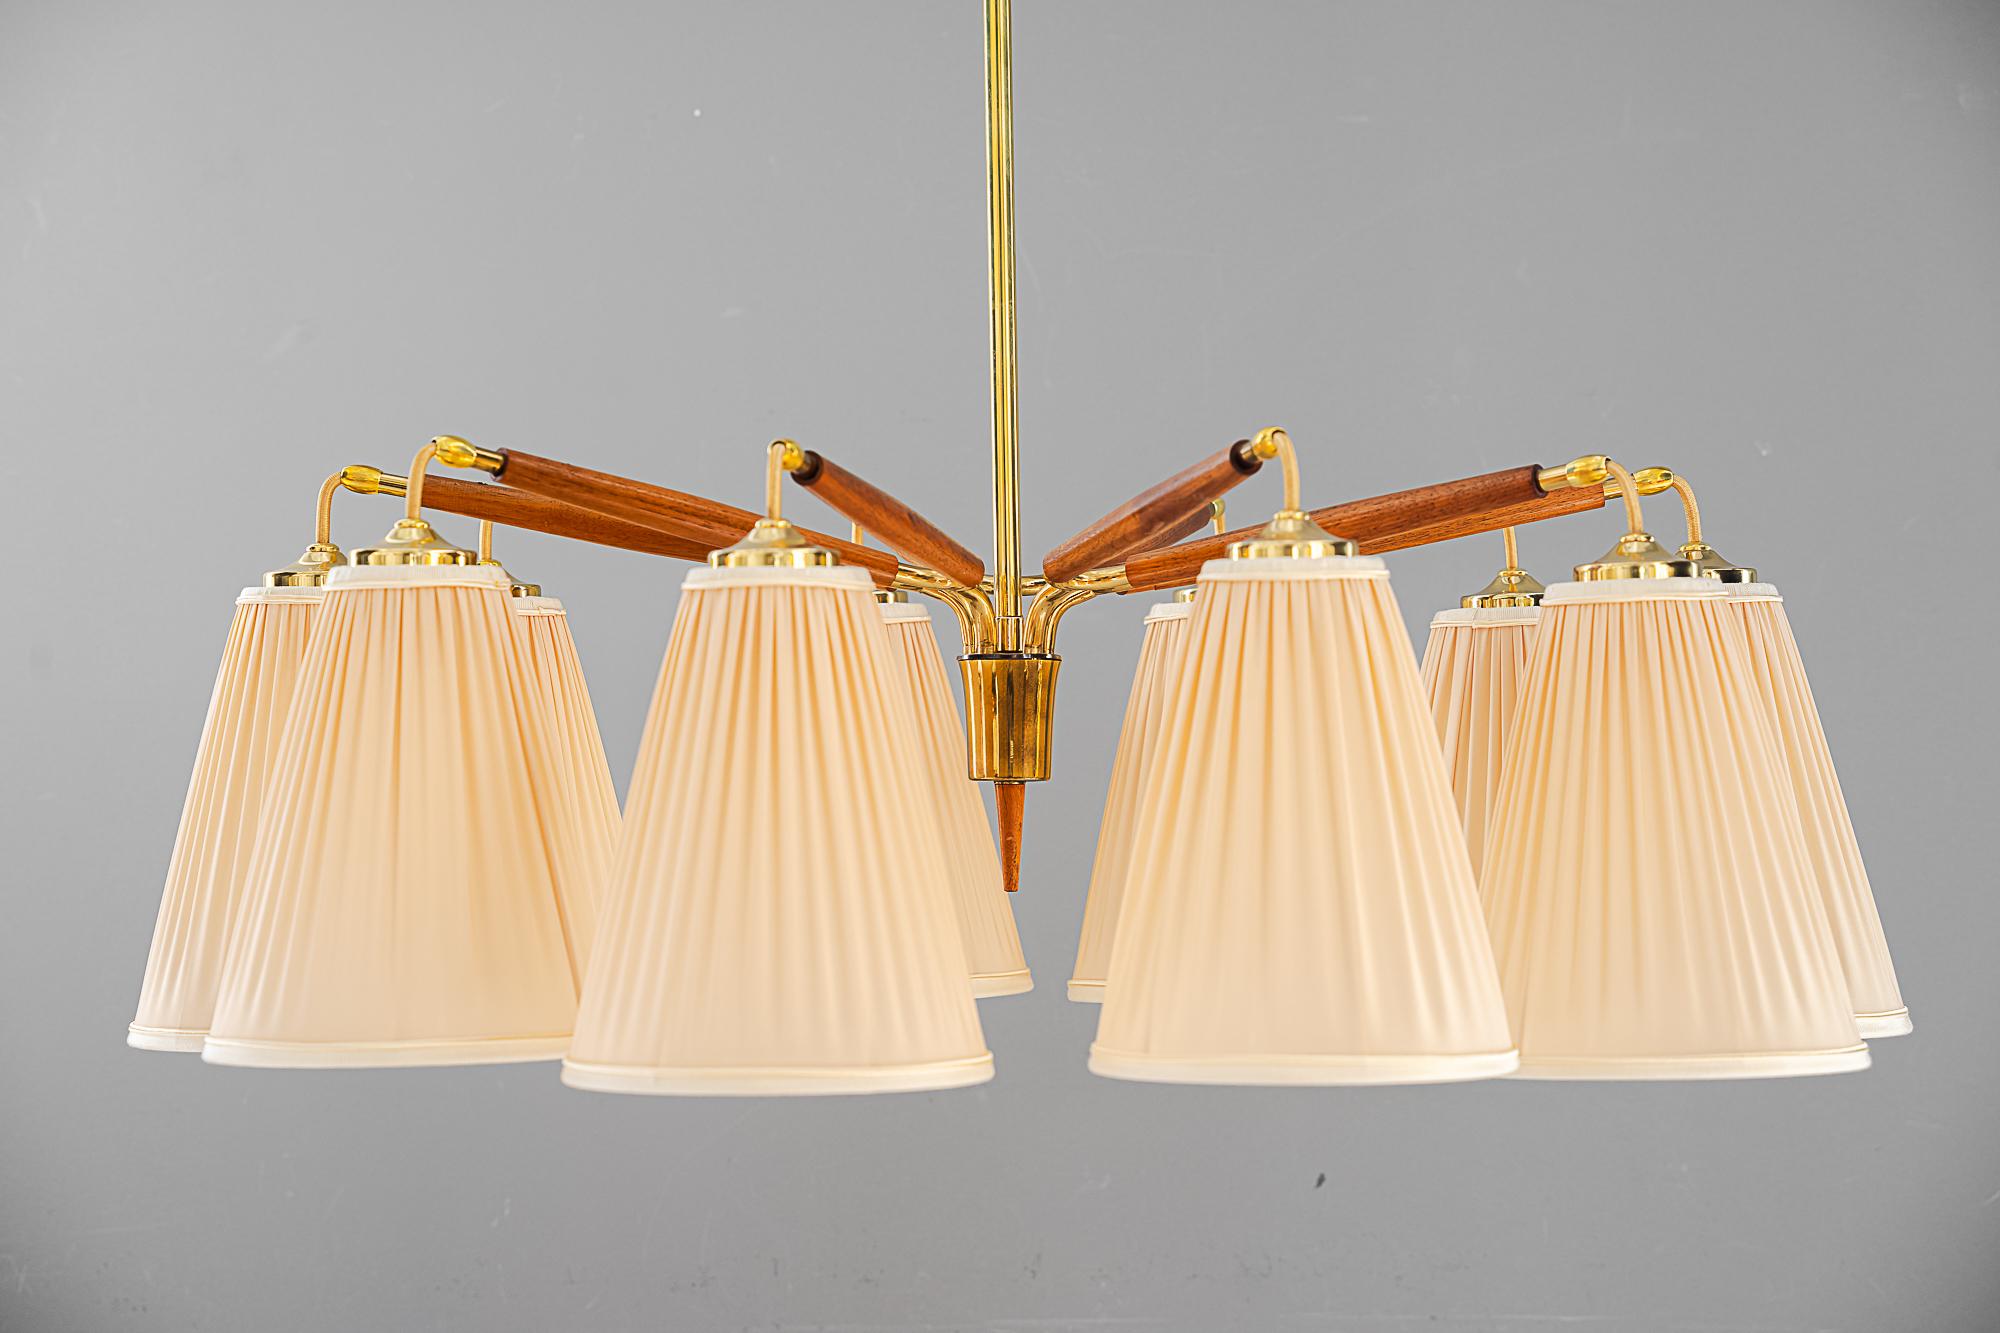 Two Rupert nikoll 10 Arm chandeliers vienna around 1950s
Brass and wood
The shades are replaced ( new )
Price per piece